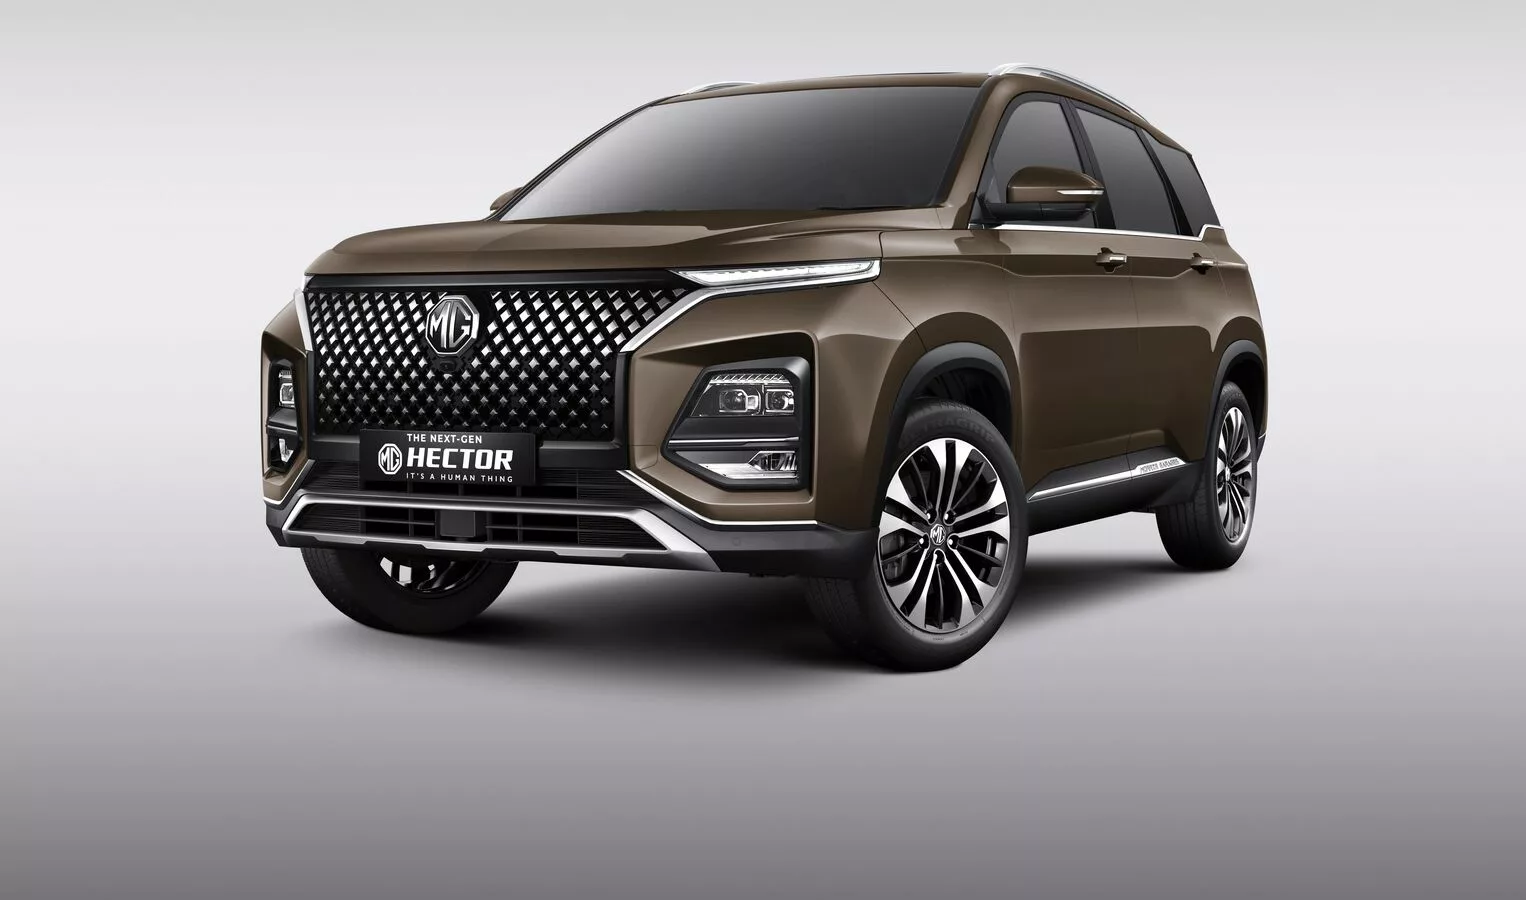 MG Hector gets new variants Shine Pro and Select Pro. Here's what's new